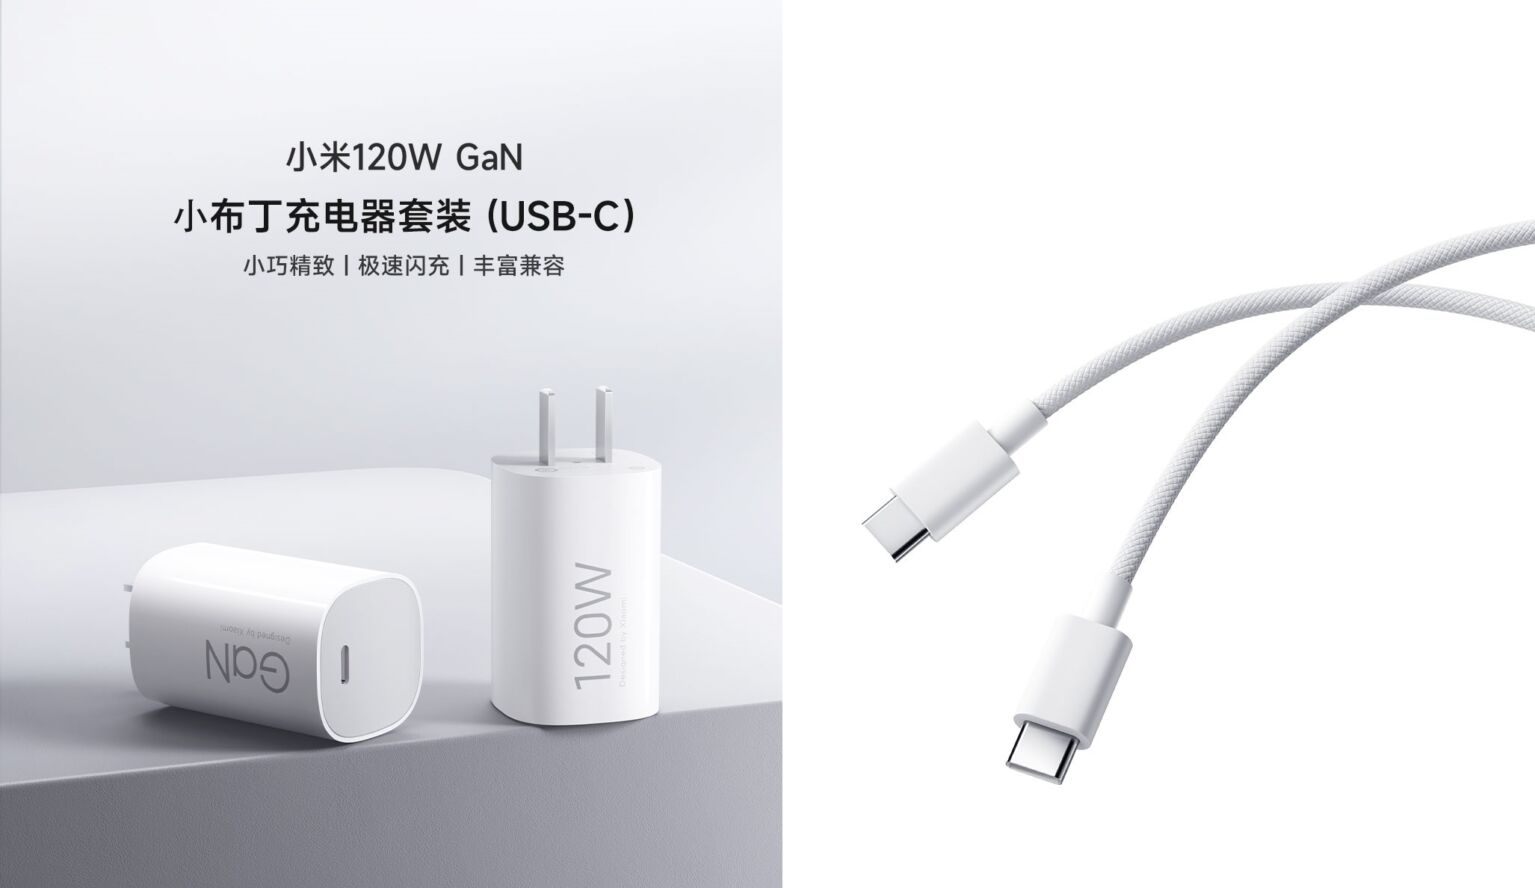 Xiaomi 120W USB-C gallium nitride charger 3A braided fast charging cable